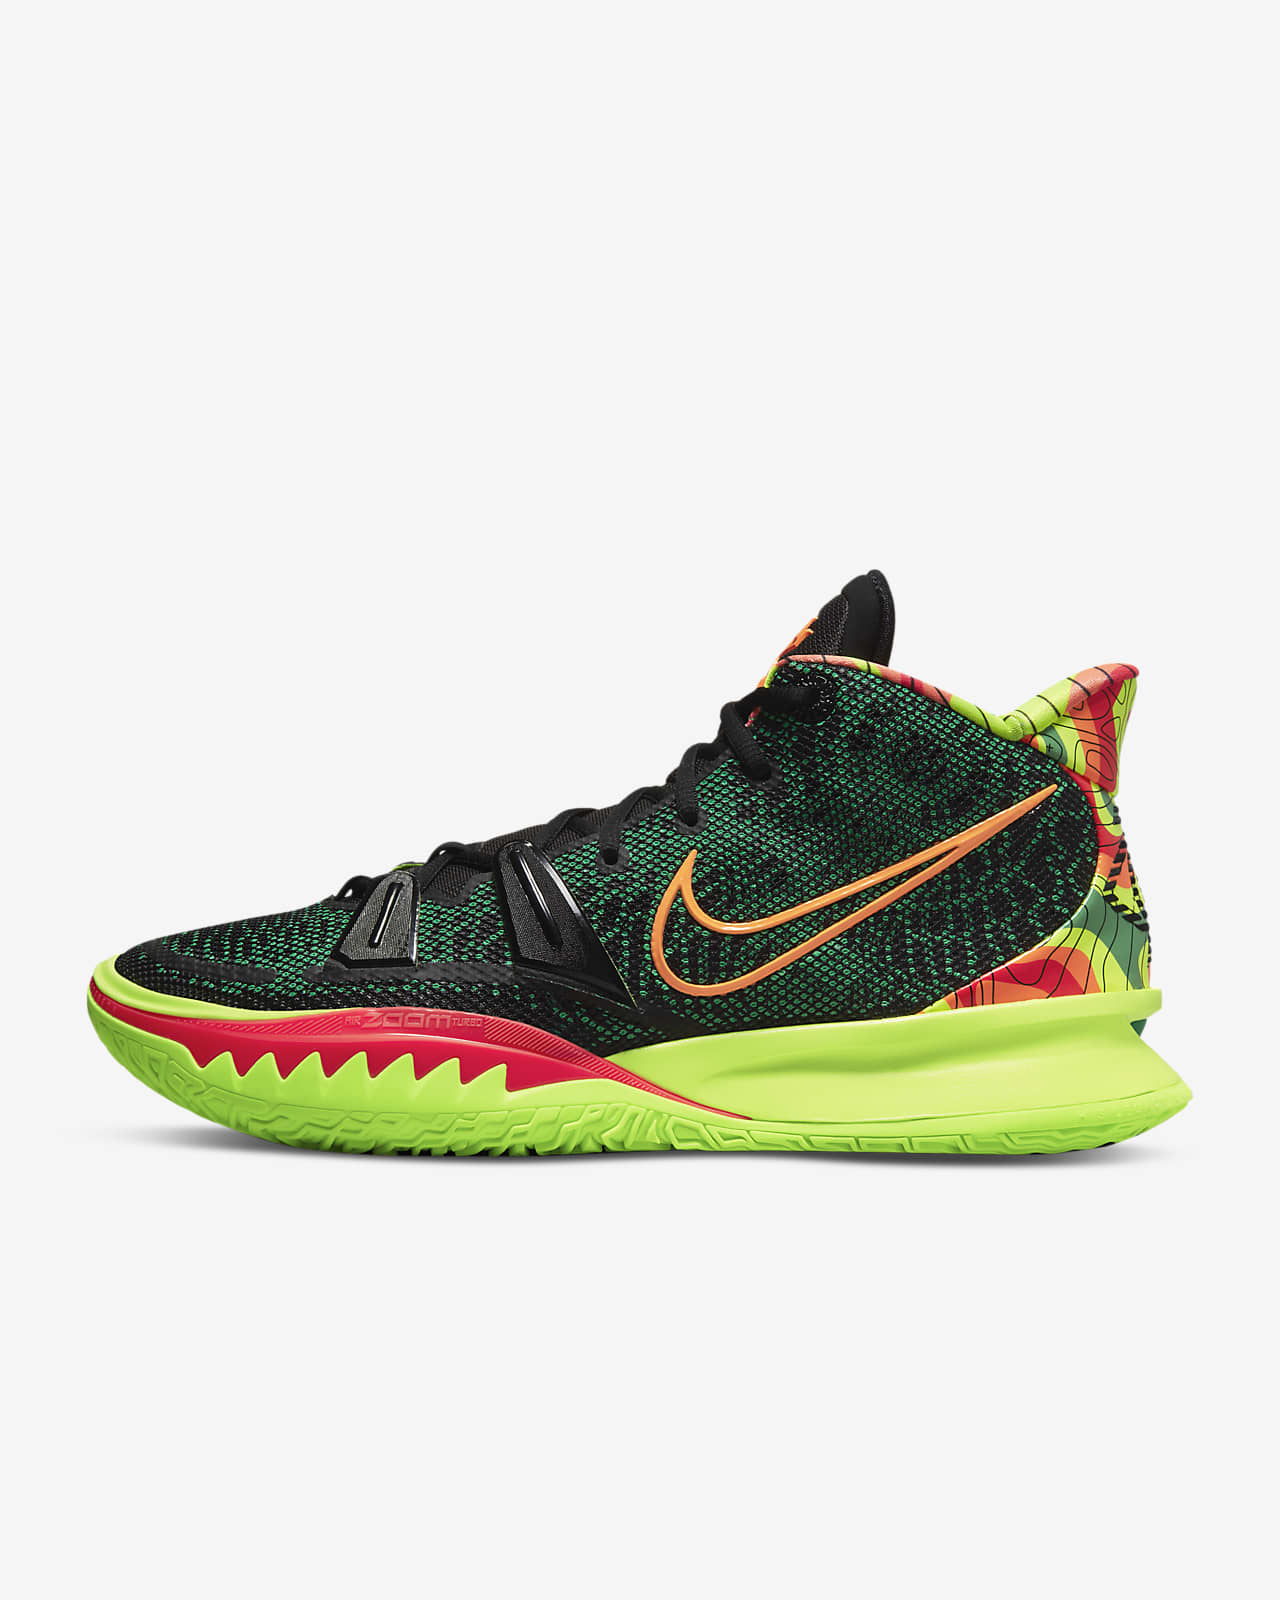 kyrie 3 top view